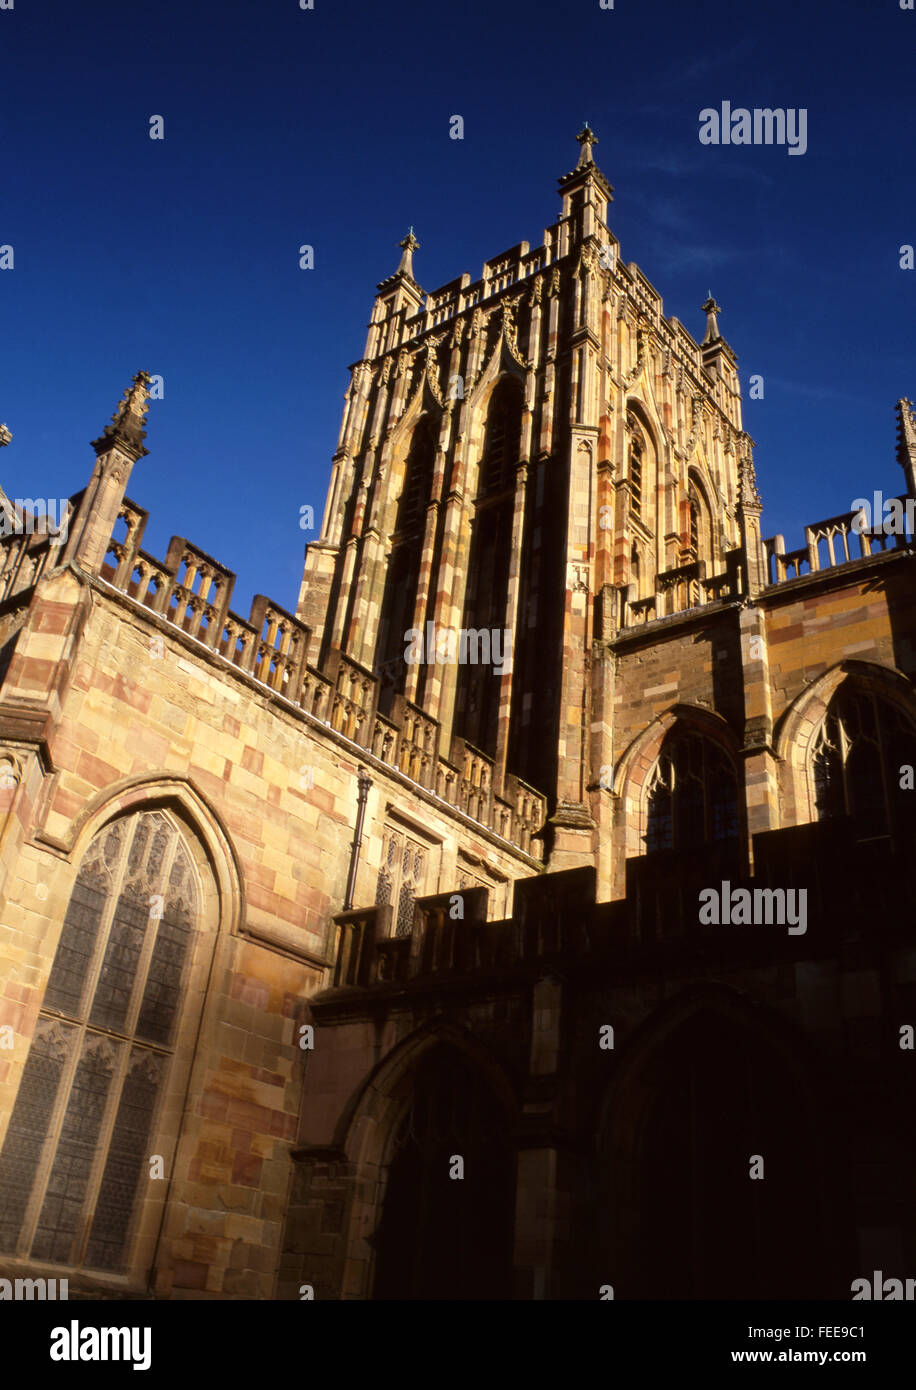 Great Malvern Priory Church central tower English Perpendicular Gothic ctyle architecture Worcestershire Midlands England UK Stock Photo